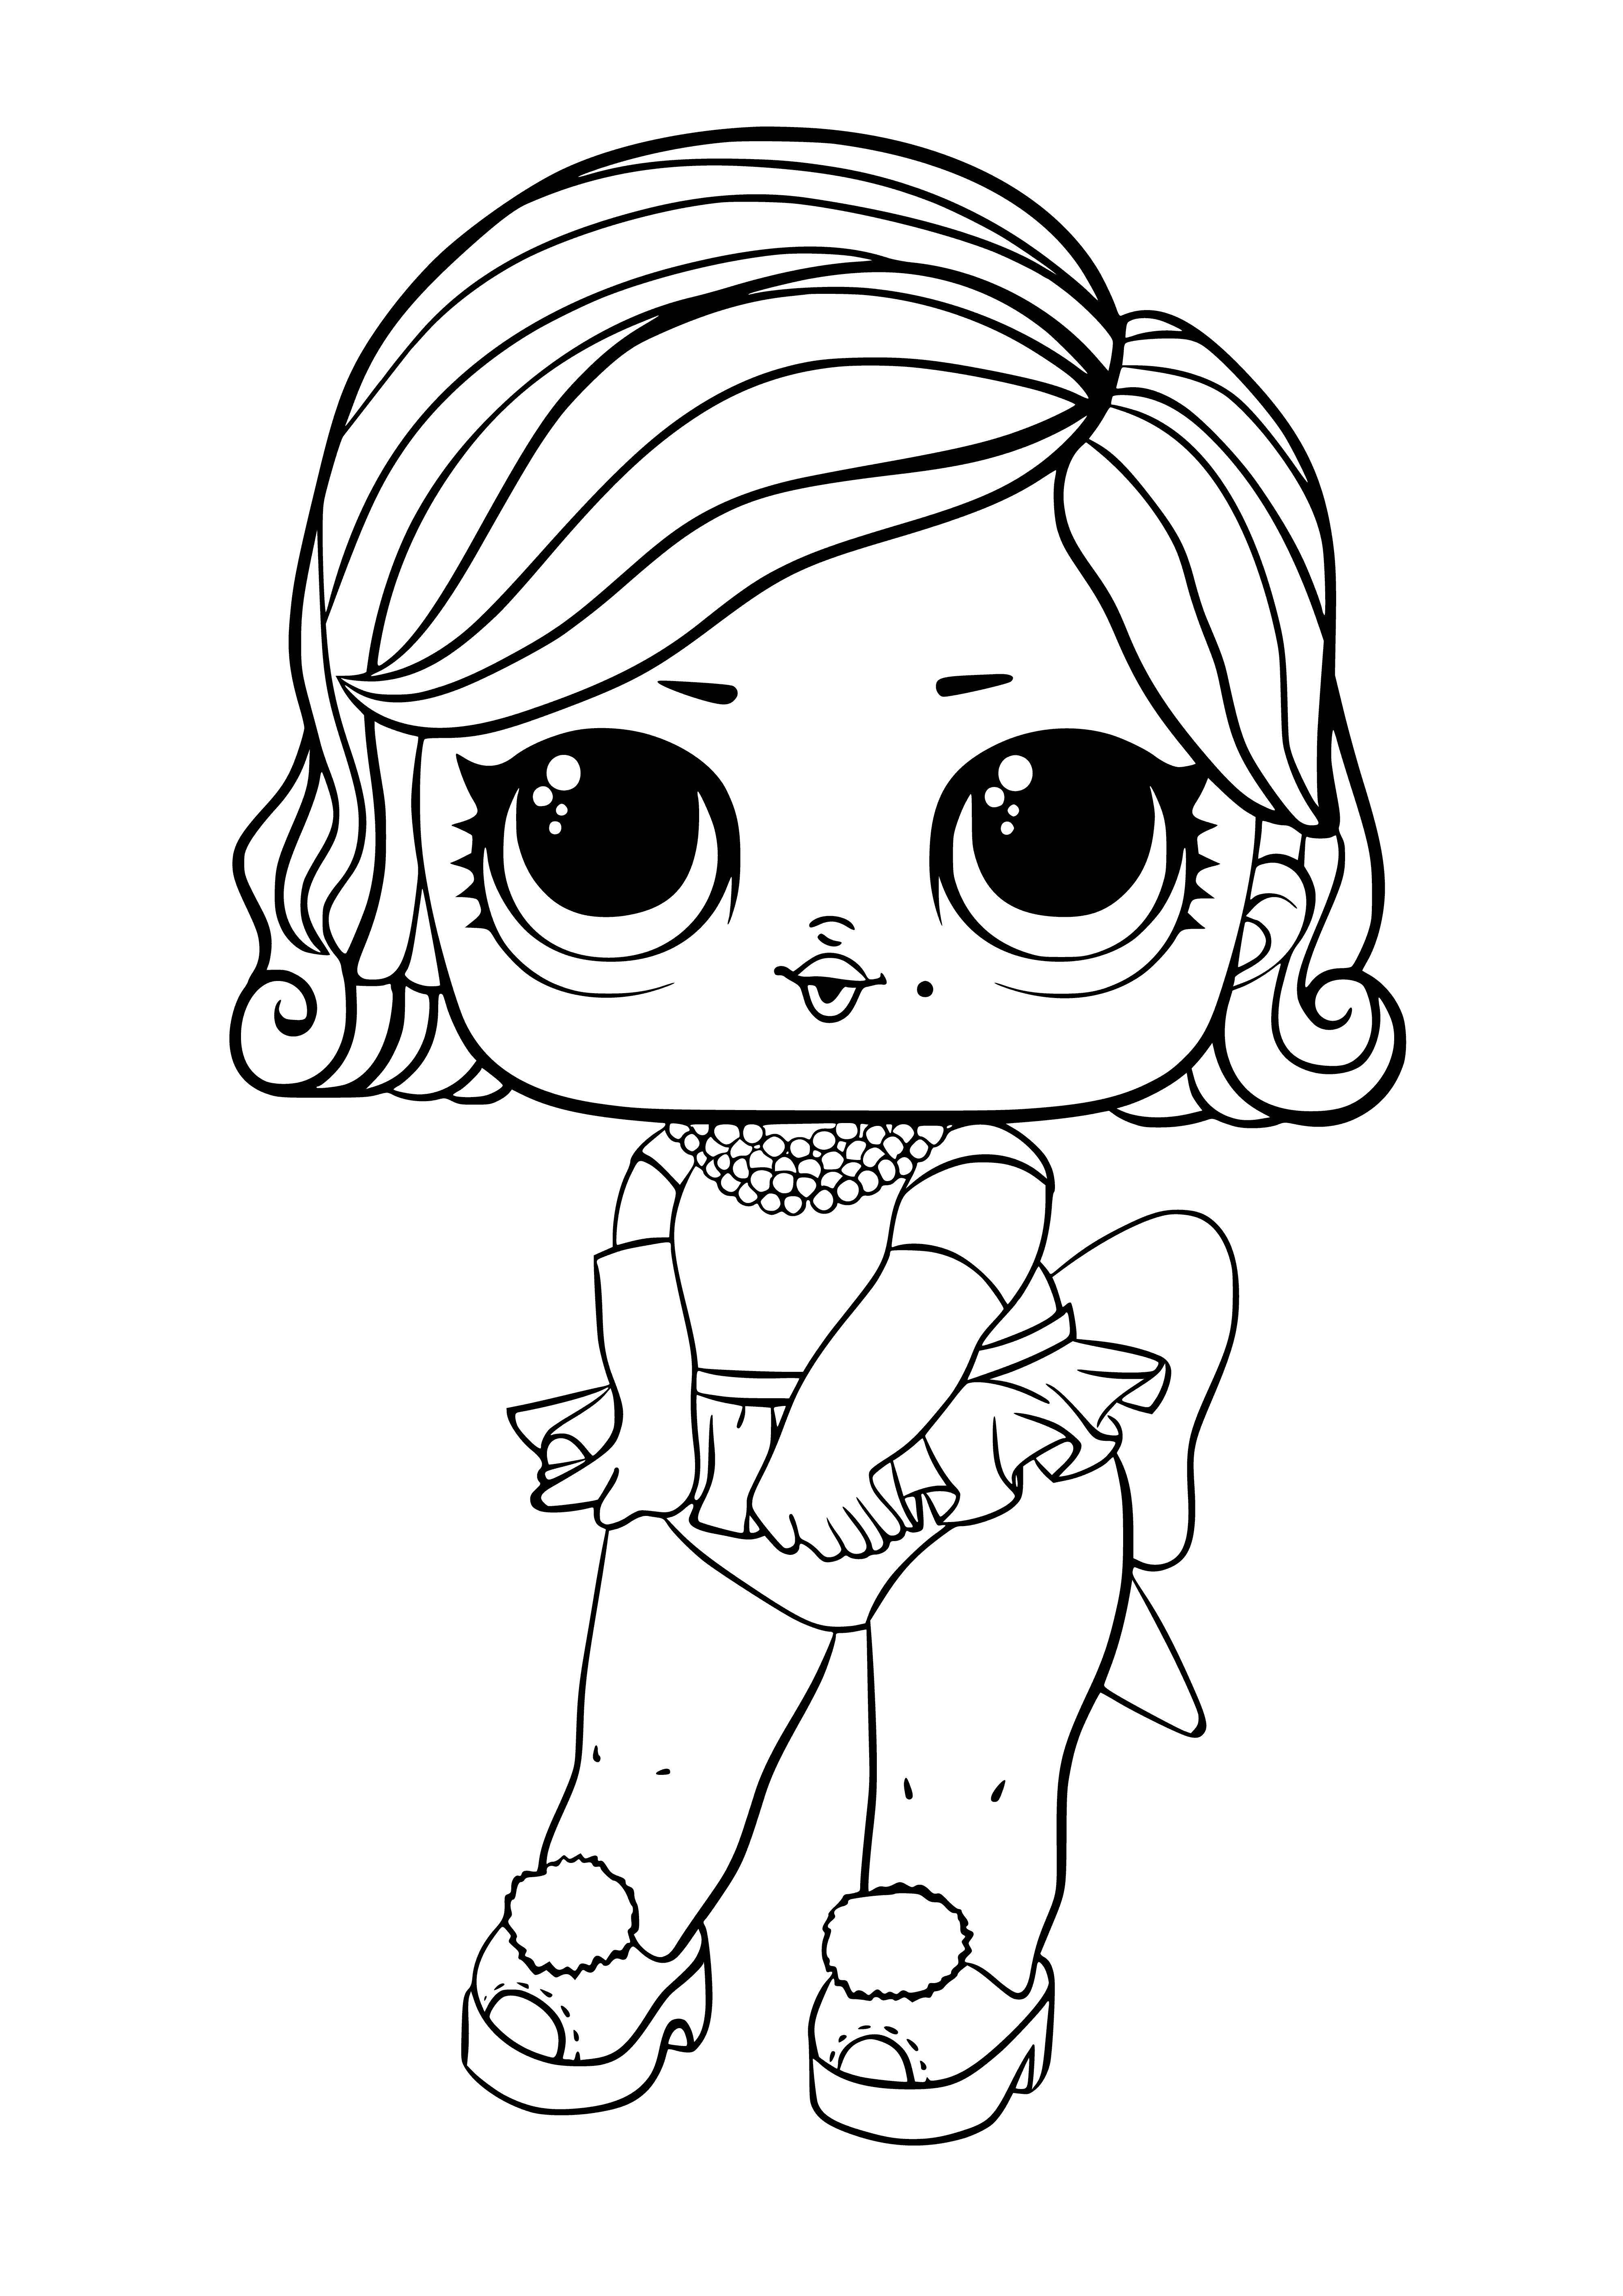 coloring page: Woman in white dress with billowing skirt & high heels stands coyly, hands on hips. Glamorous cityscape in the background.